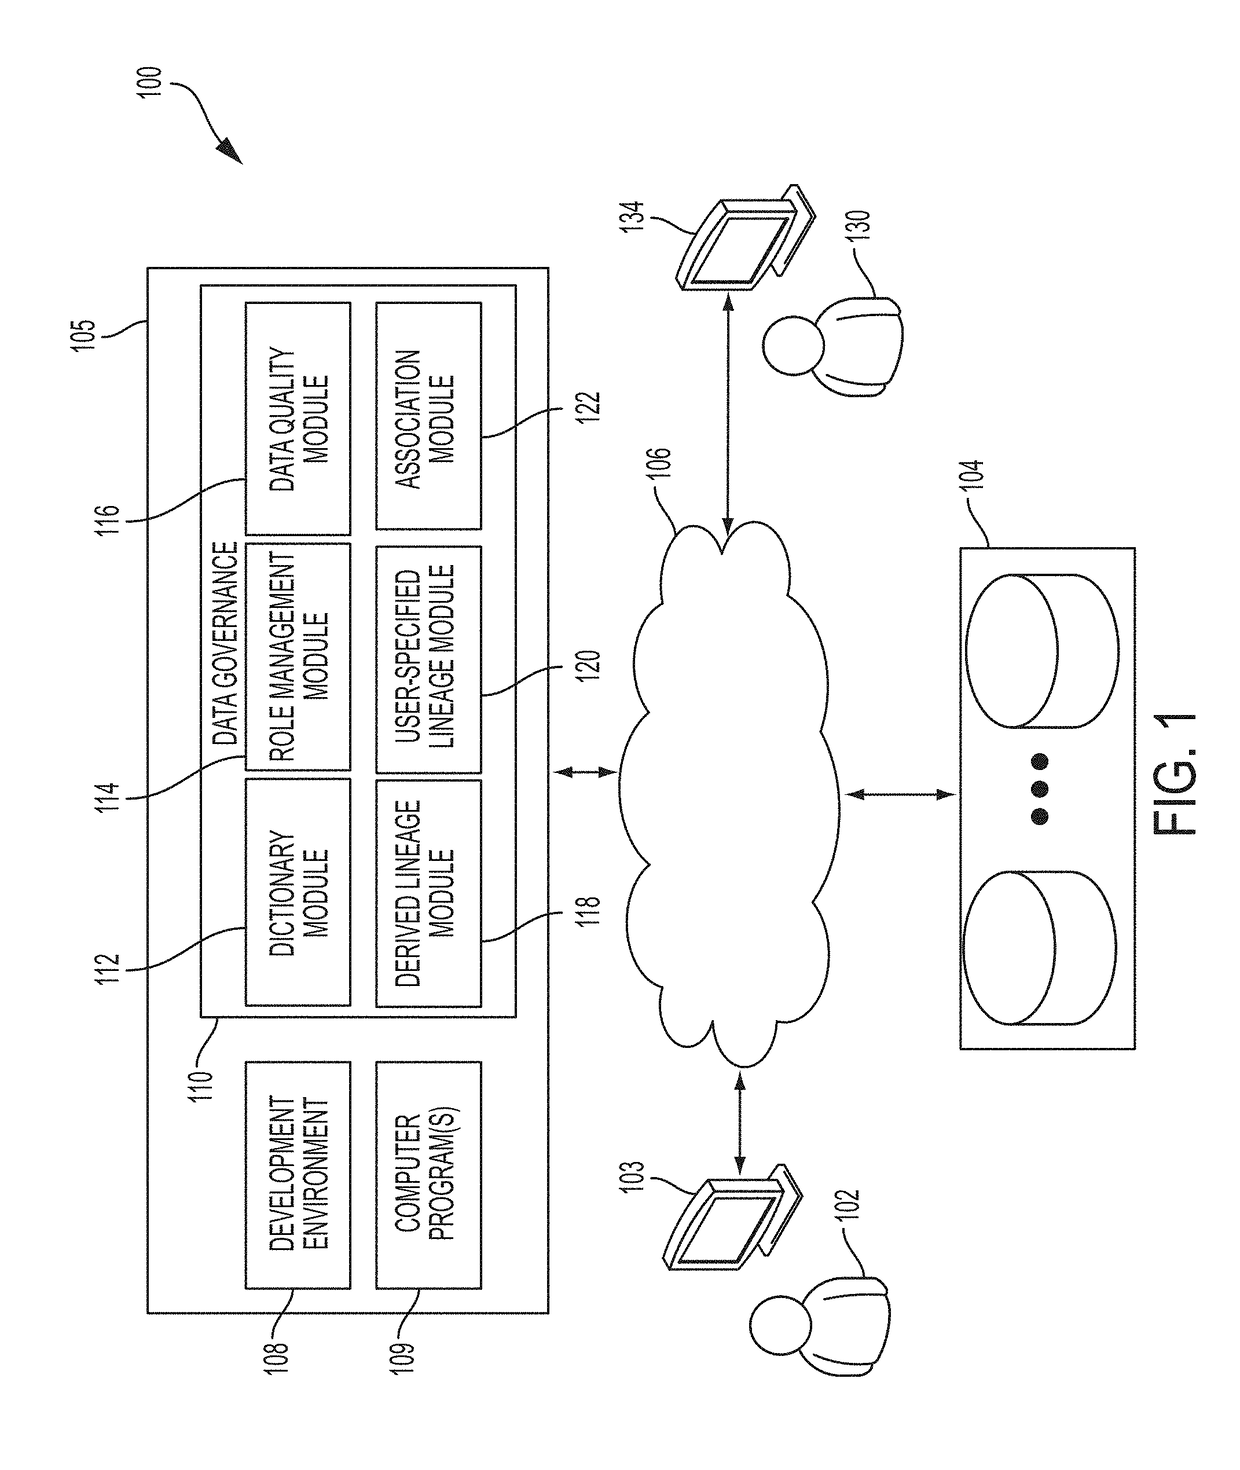 Systems and methods for determining relationships among data elements